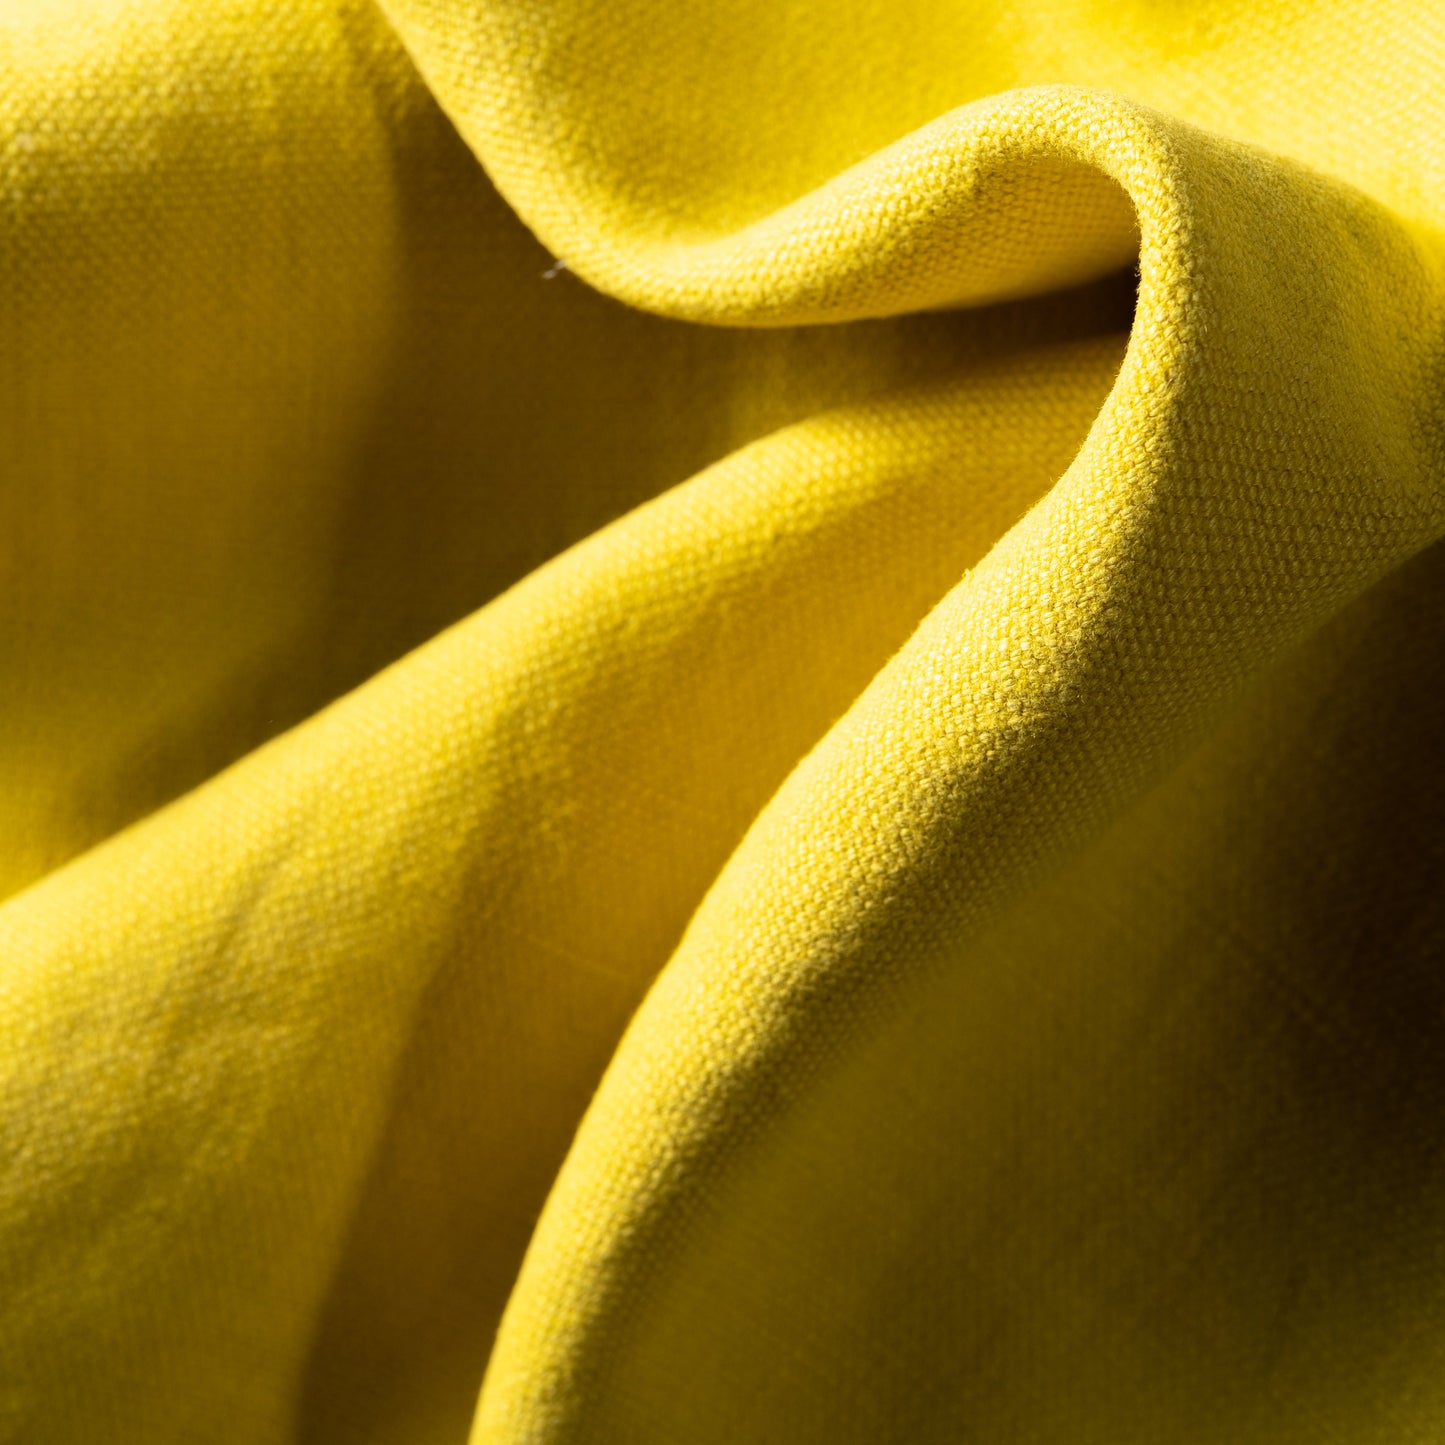 14.3 oz/sq yard 100% Upholstery/ Slipcover Weight Linen in Canary Swatch